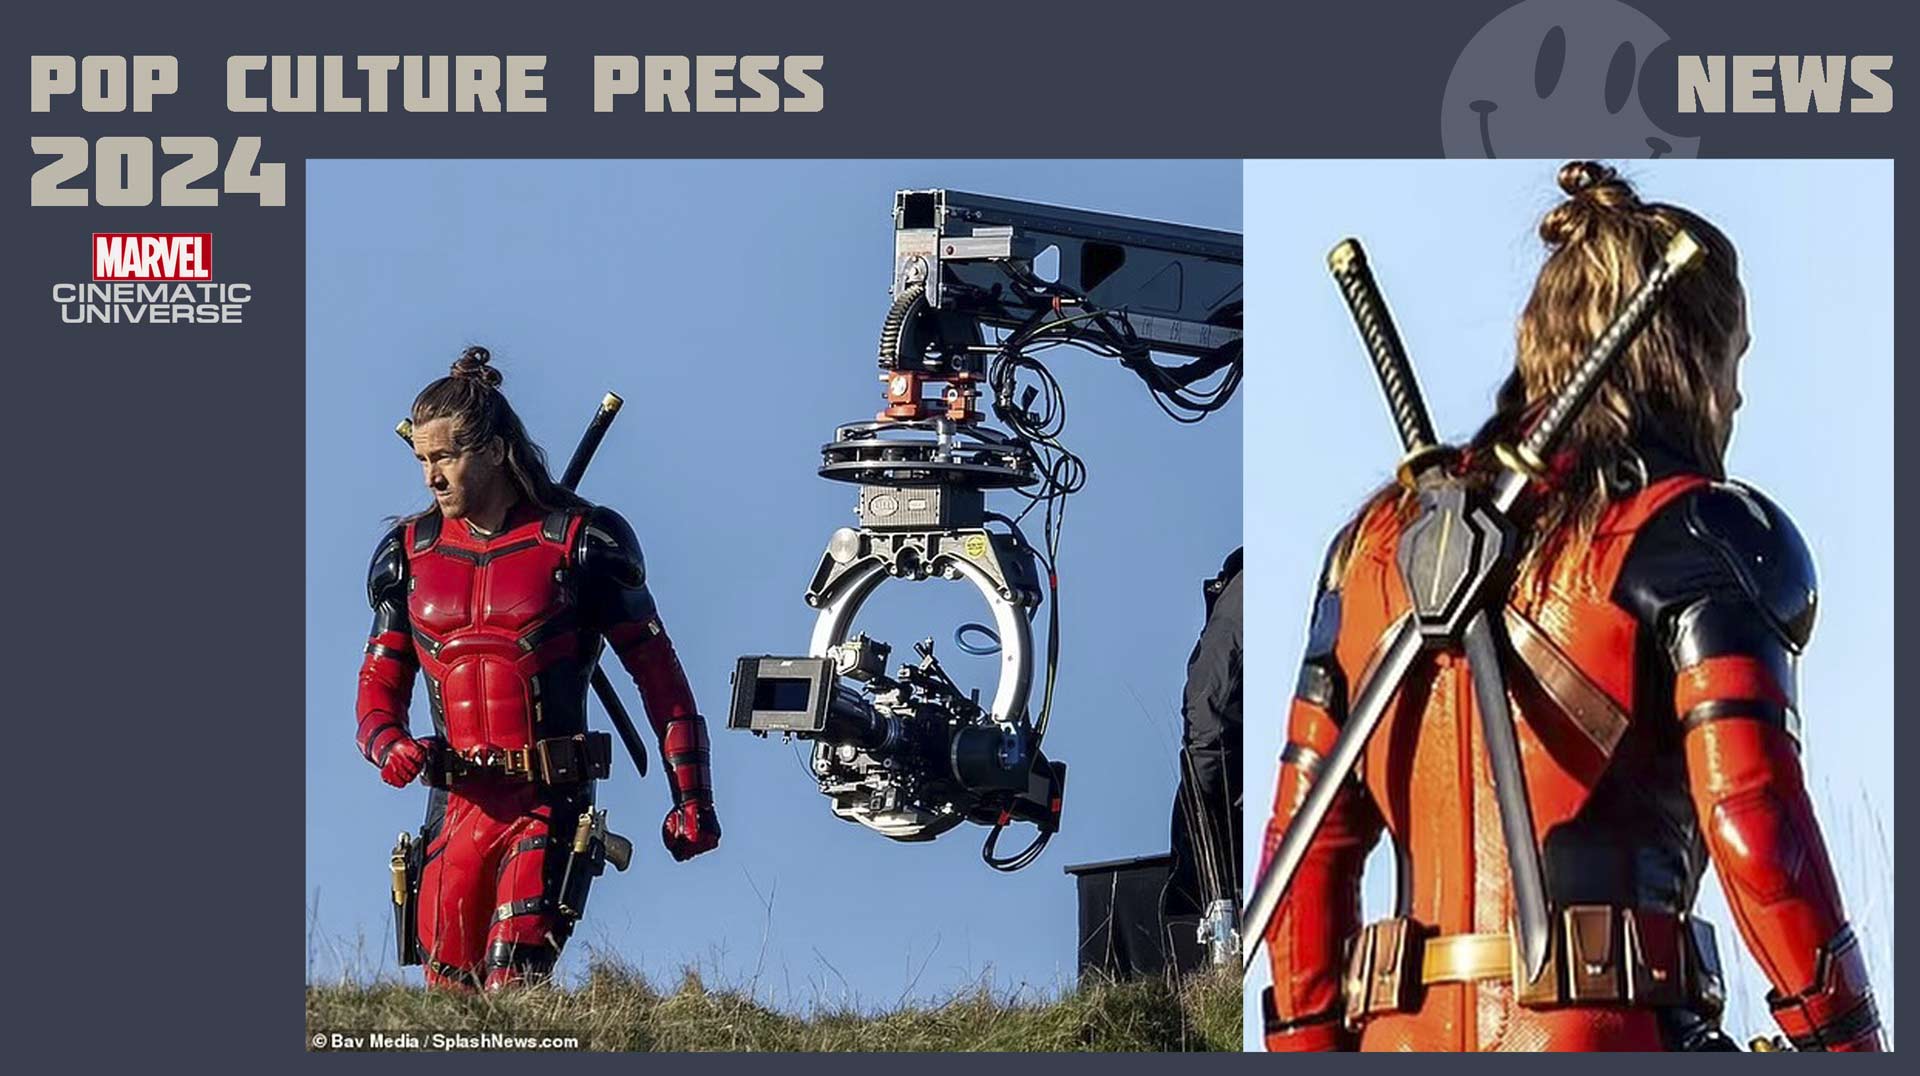 Deadpool III set photos with Wolverine in yellow suit, Ryan Reynolds as Deadpool variant, and Dogpool, featuring outdoor shots with camera crane